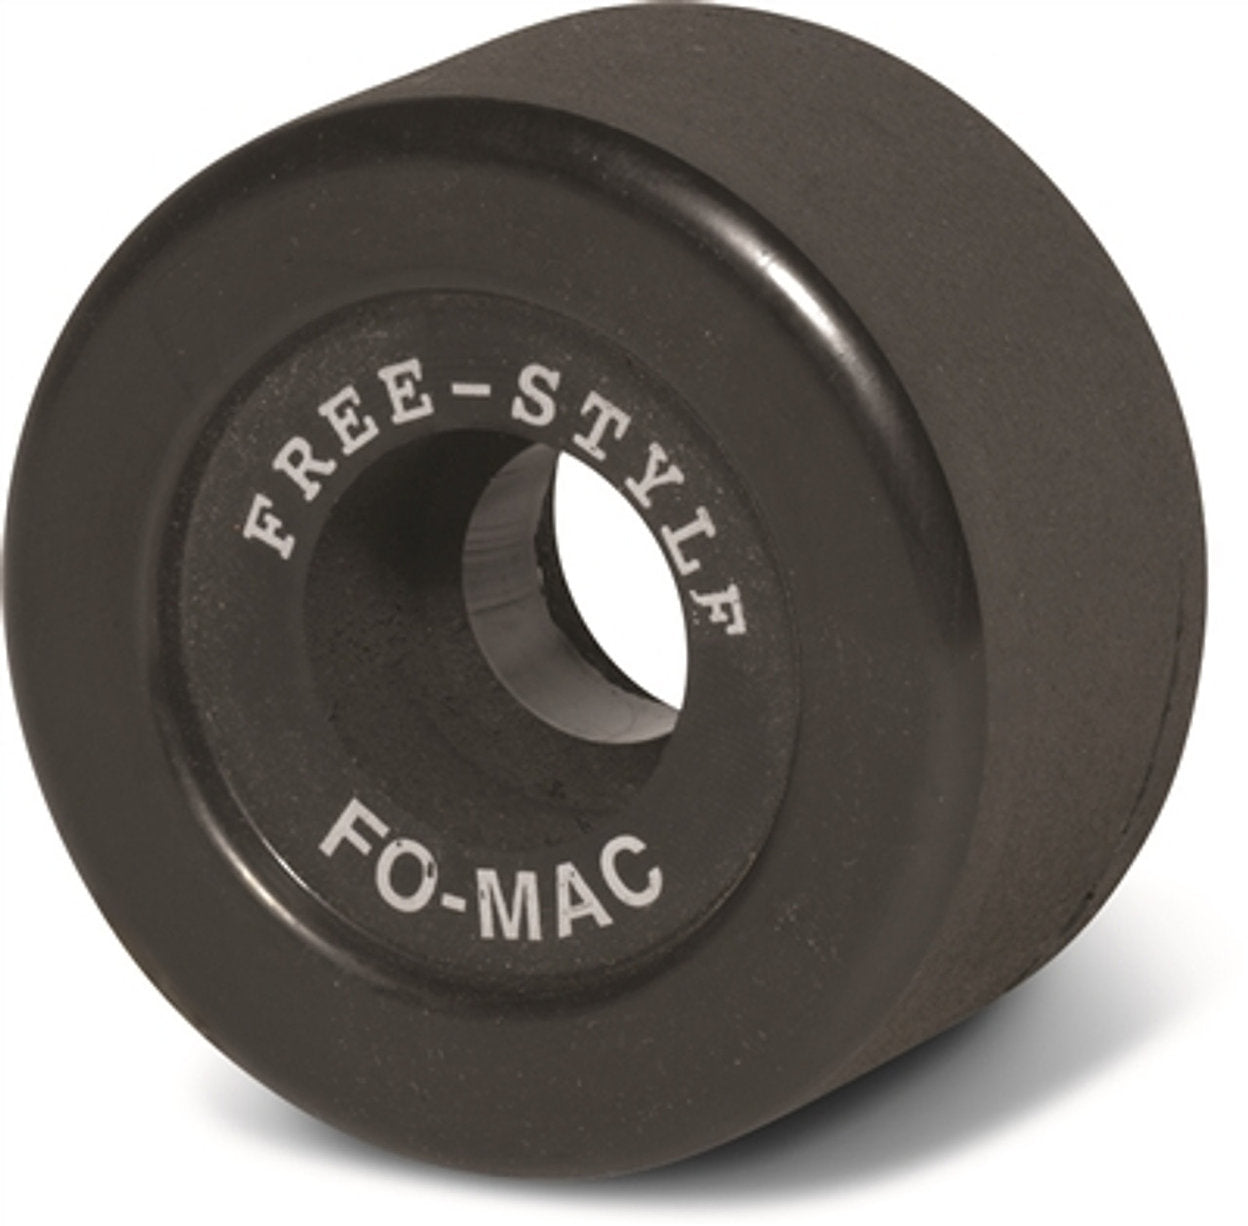 Sure-Grip Fomac Freestyle Indoor Wheels 101a